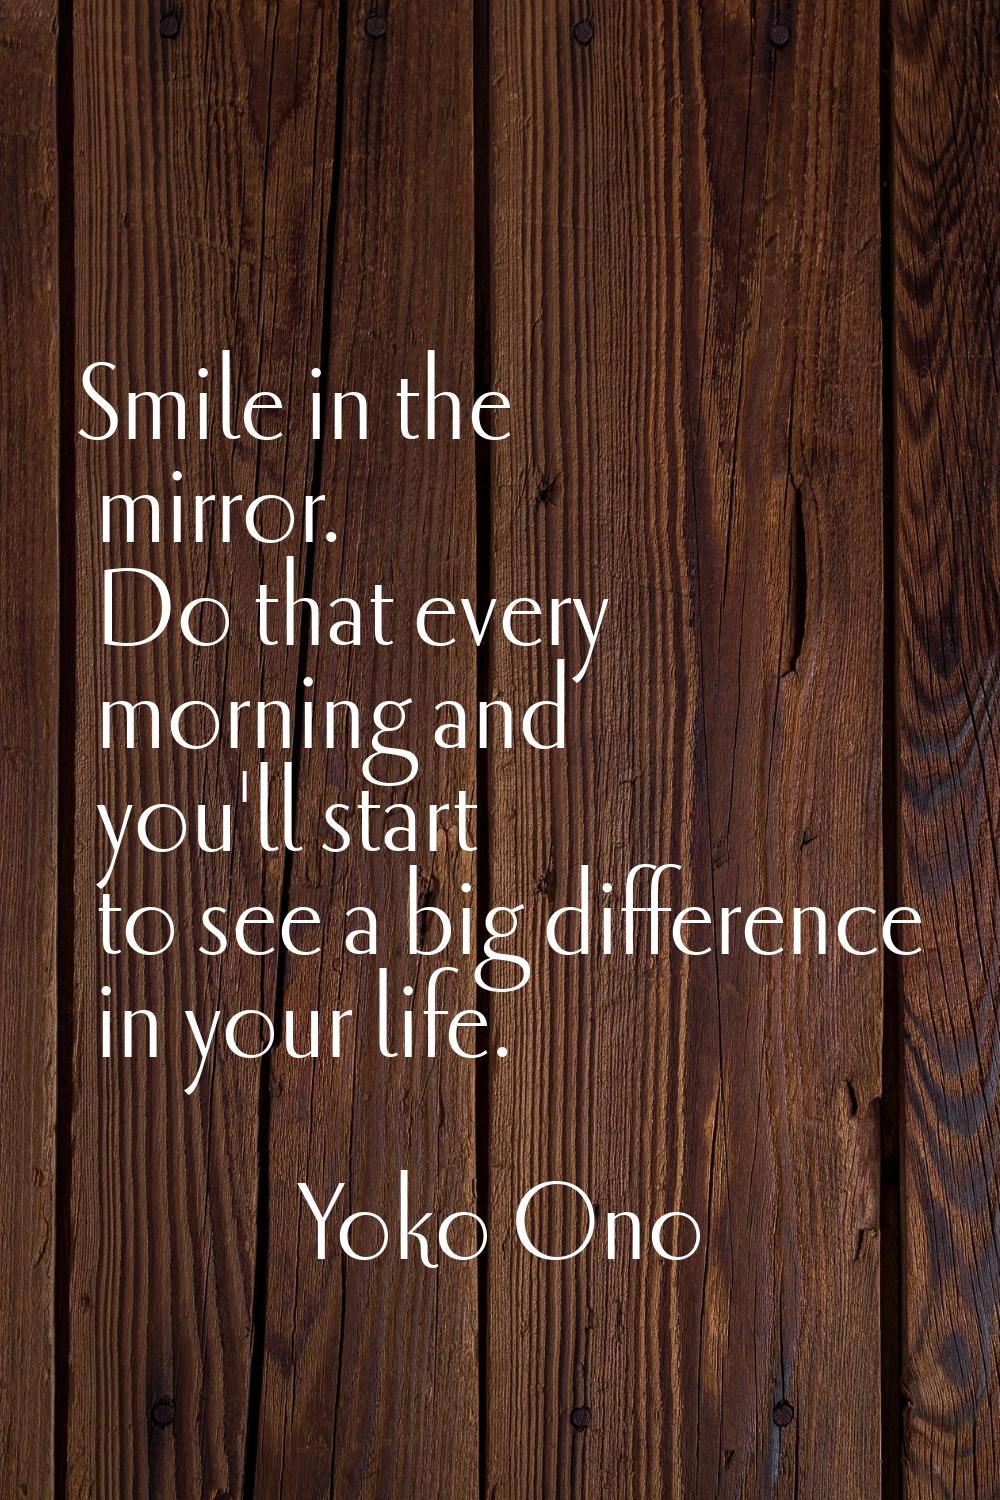 Smile in the mirror. Do that every morning and you'll start to see a big difference in your life.